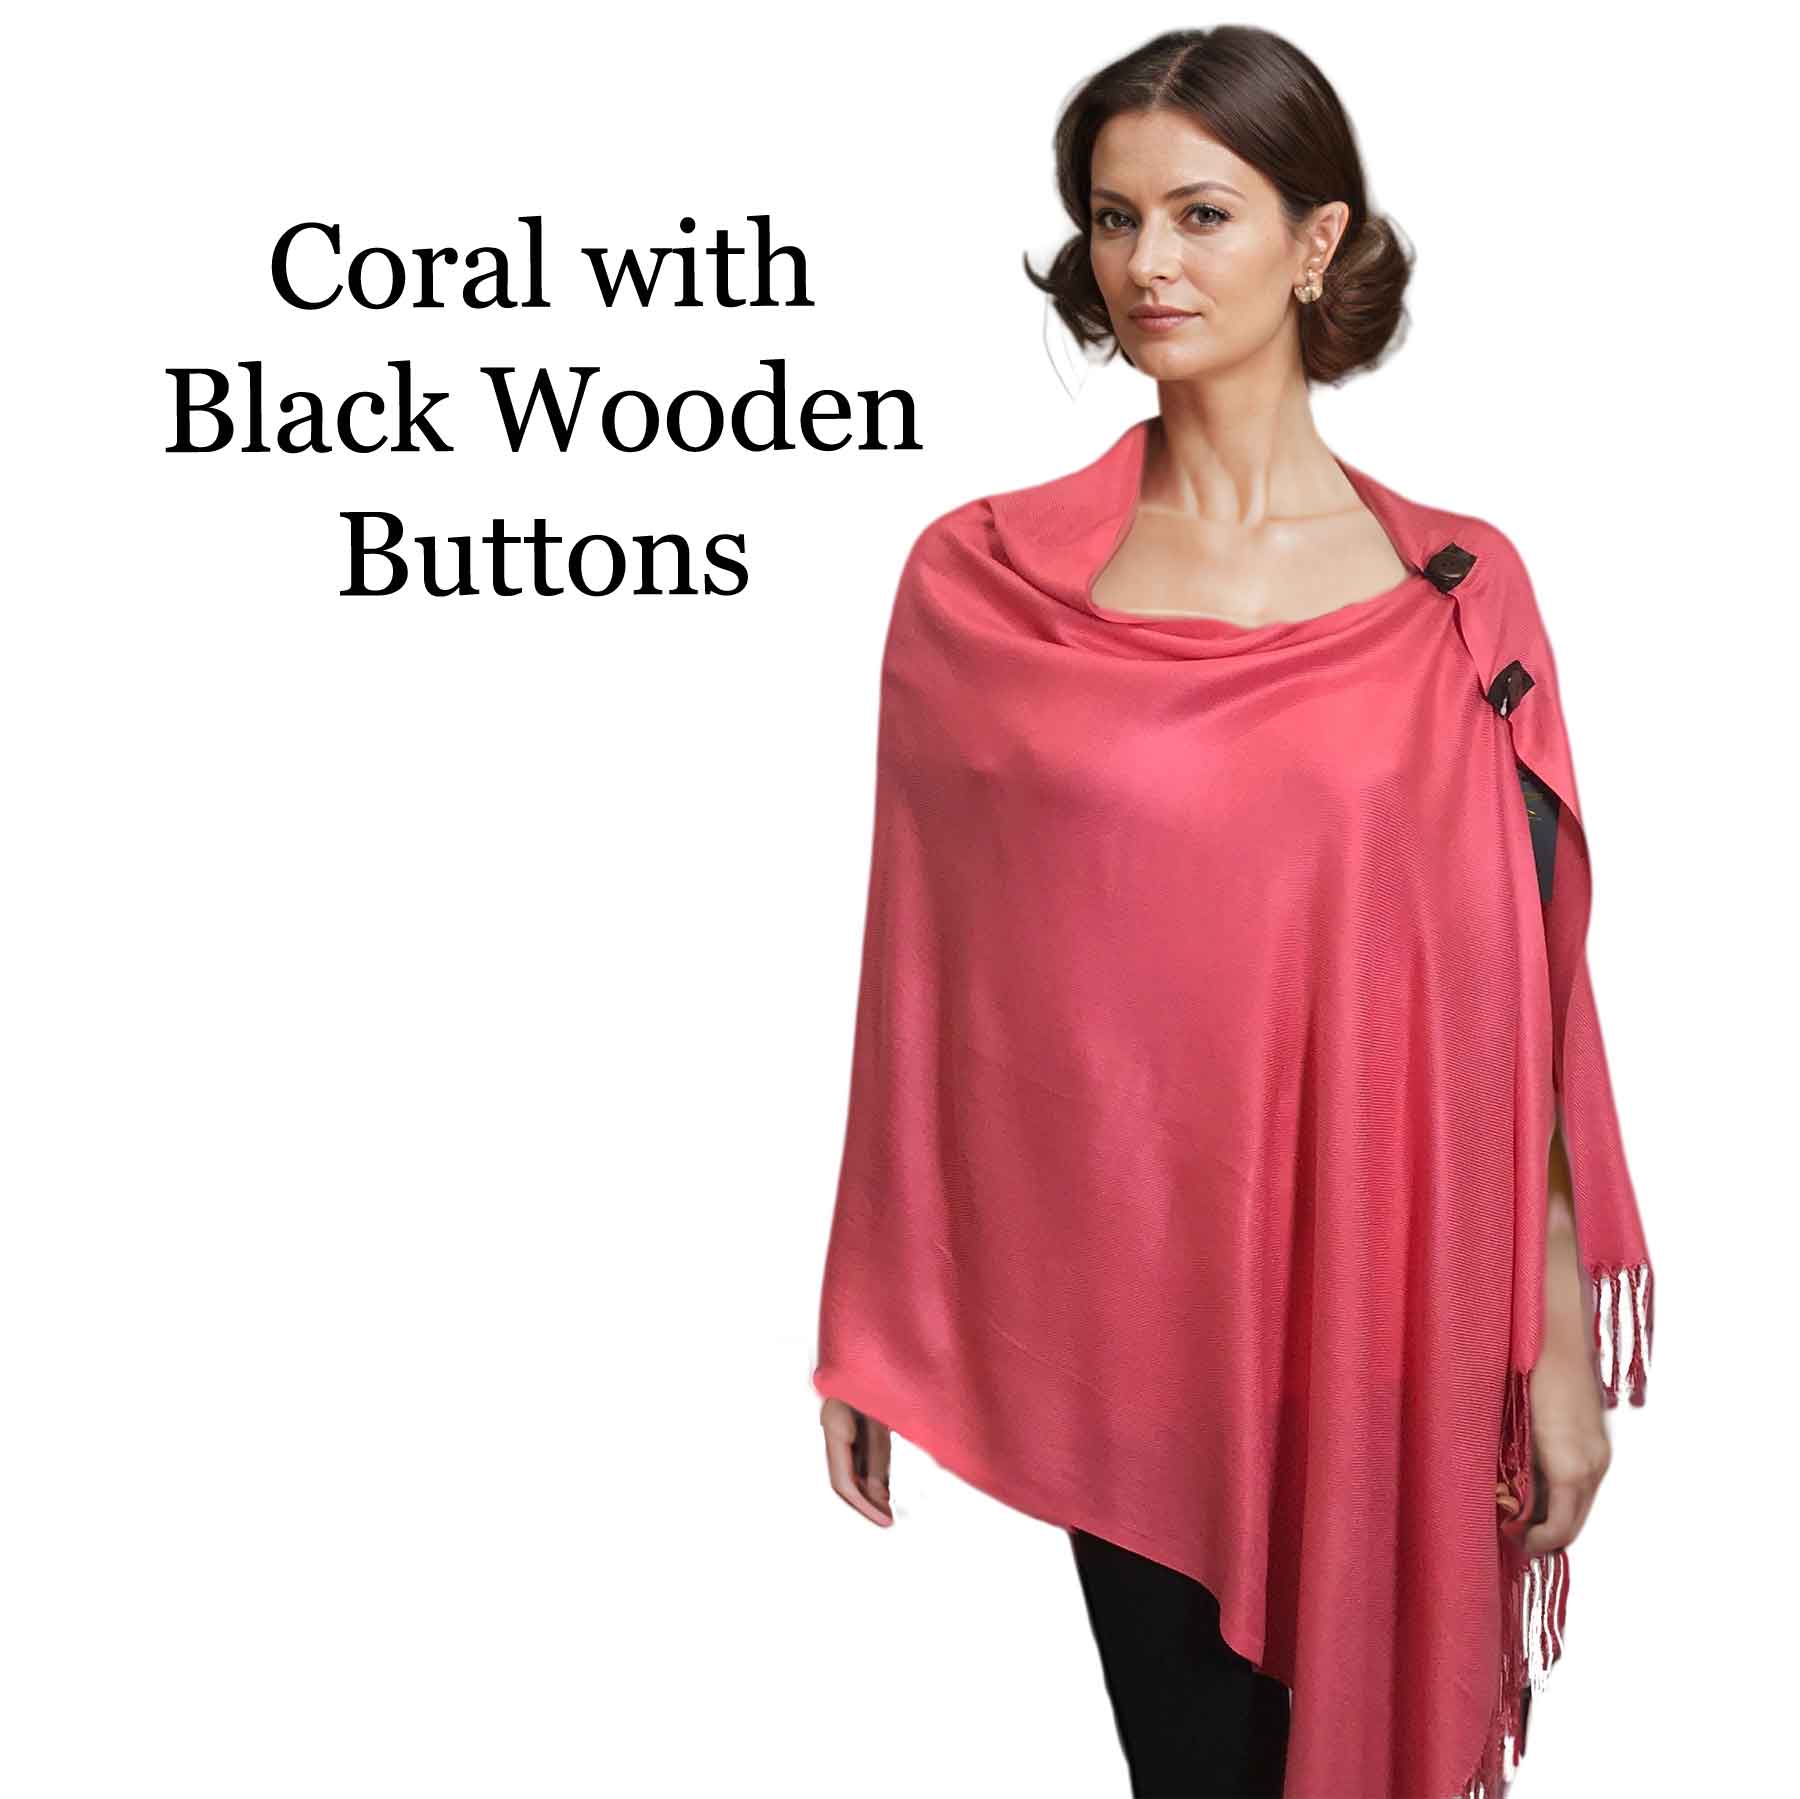 3866 - Pashmina Style Solid Color Button Shawls 3109 - Solid Ivory<br>
Pashmina Style Button Shawl - 27